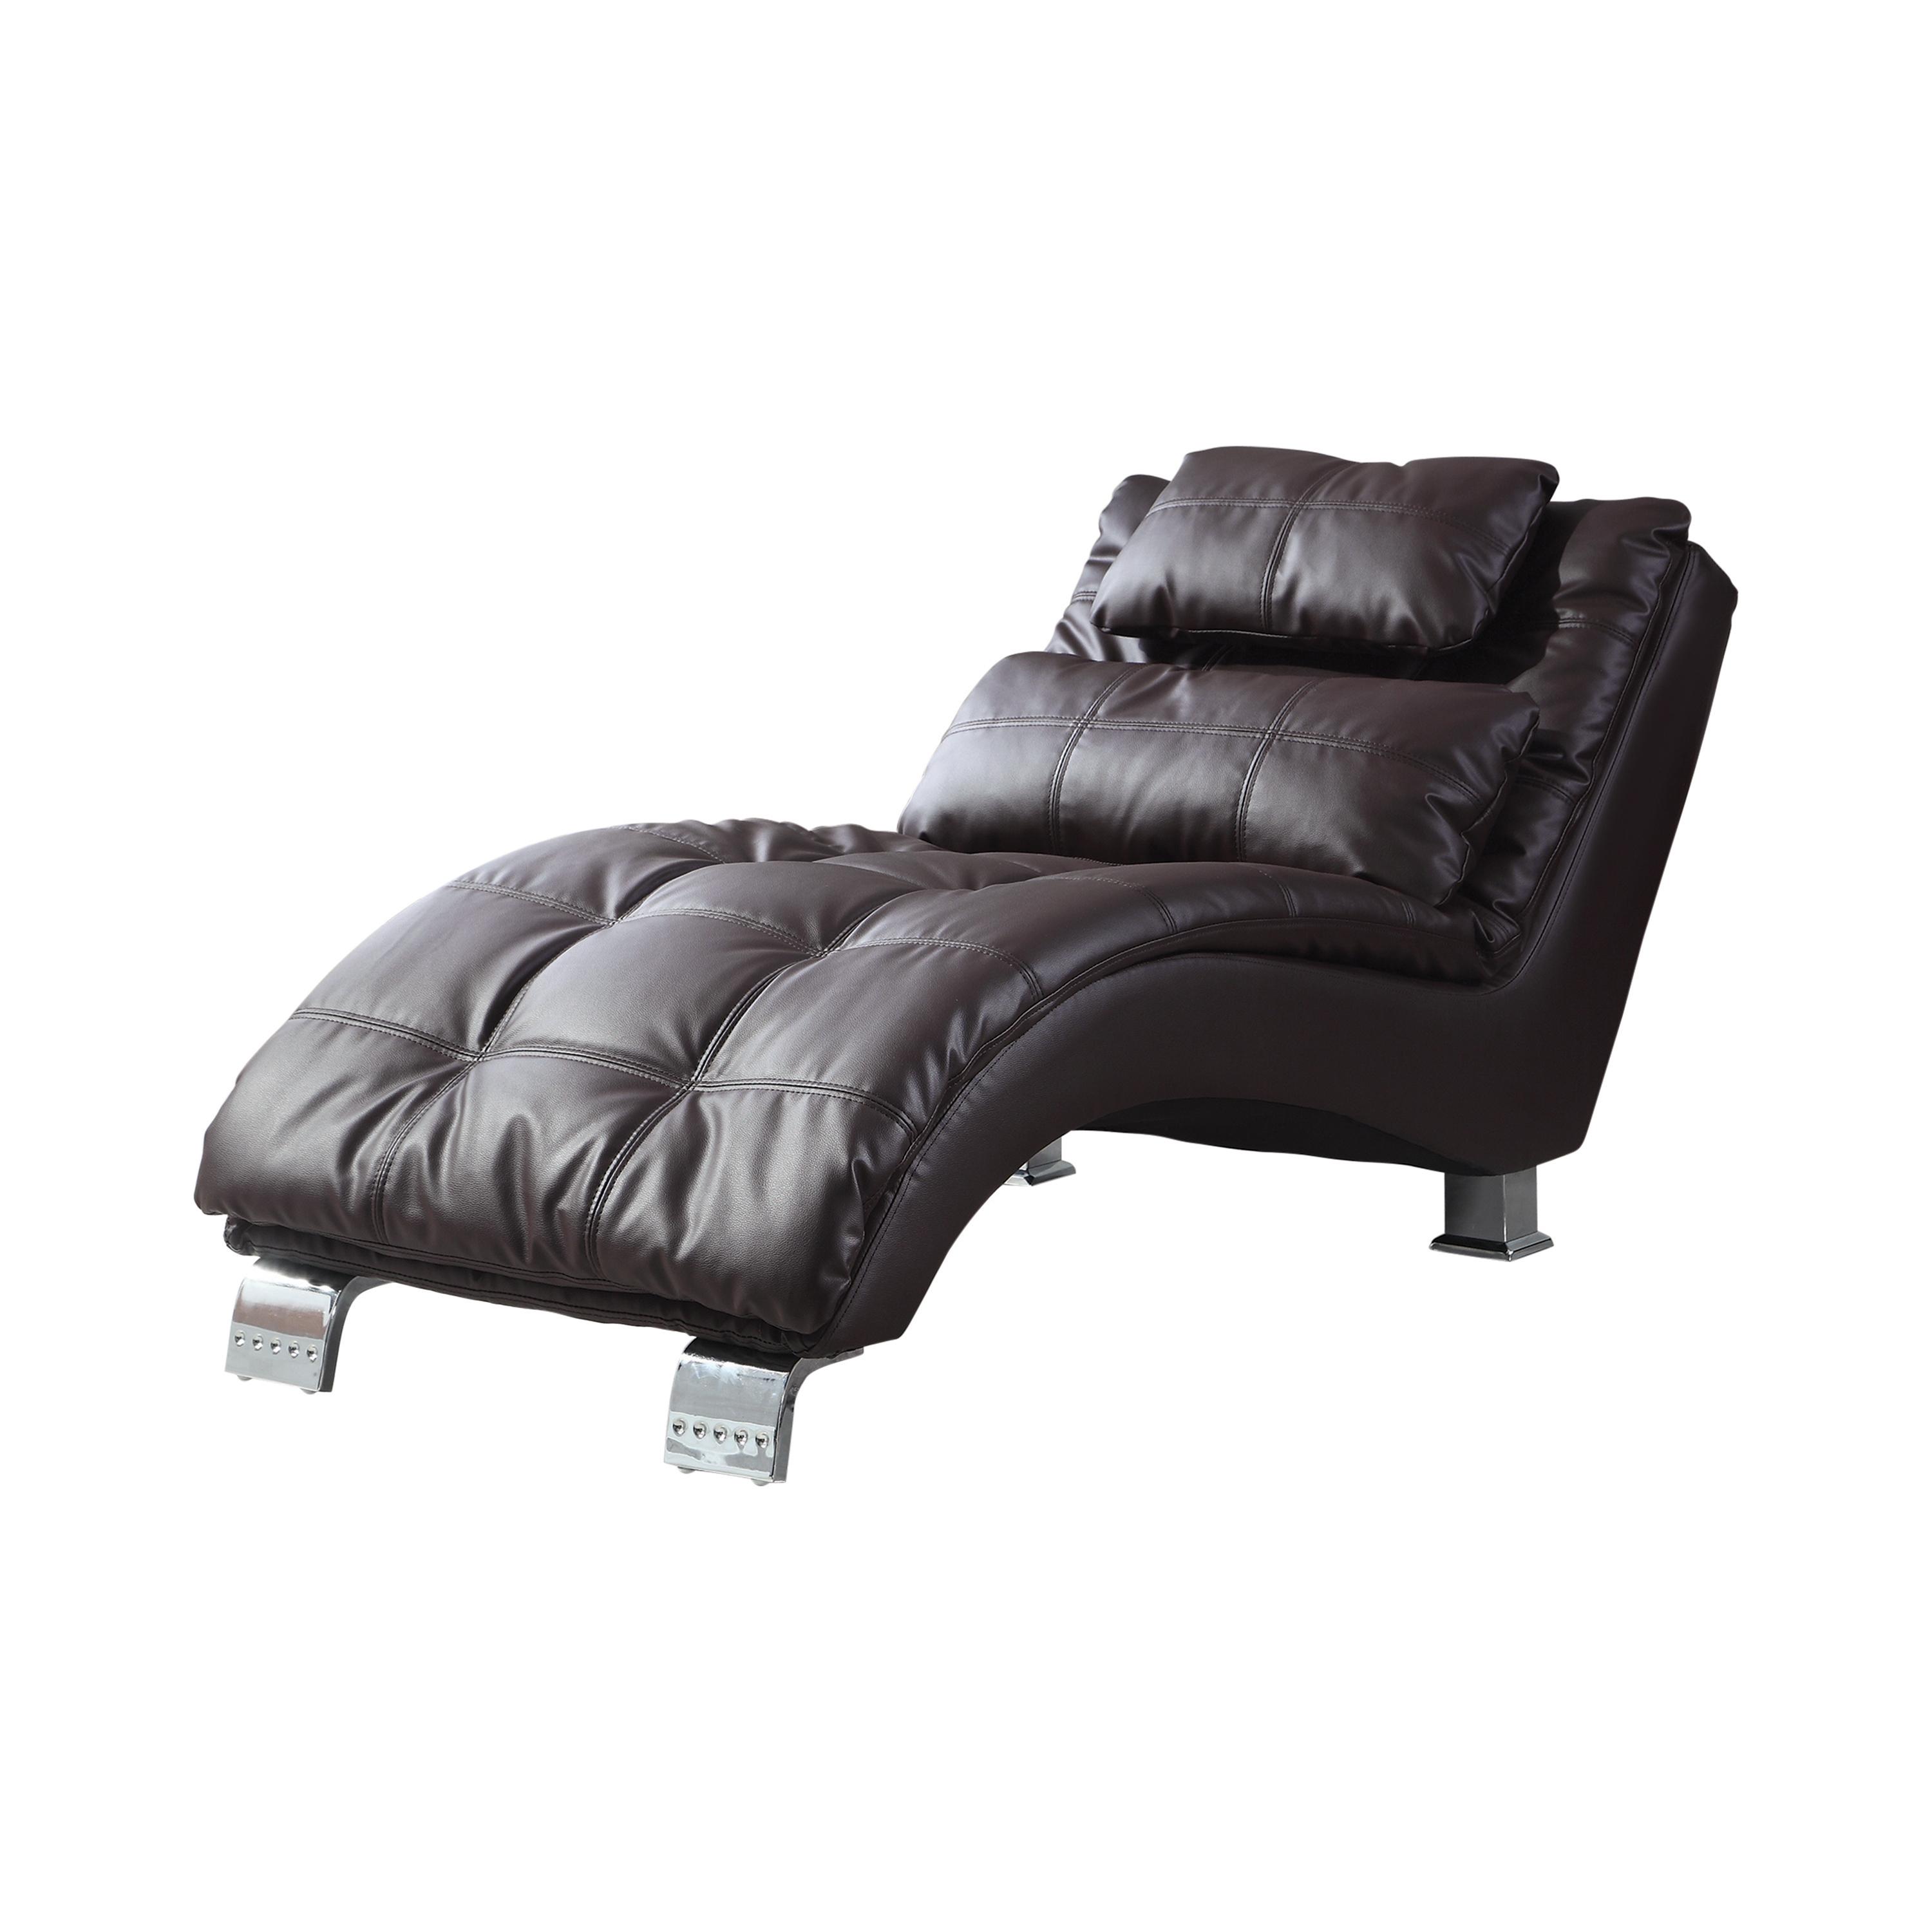 Modern Chaise 550076 Dilleston 550076 in Brown Leatherette